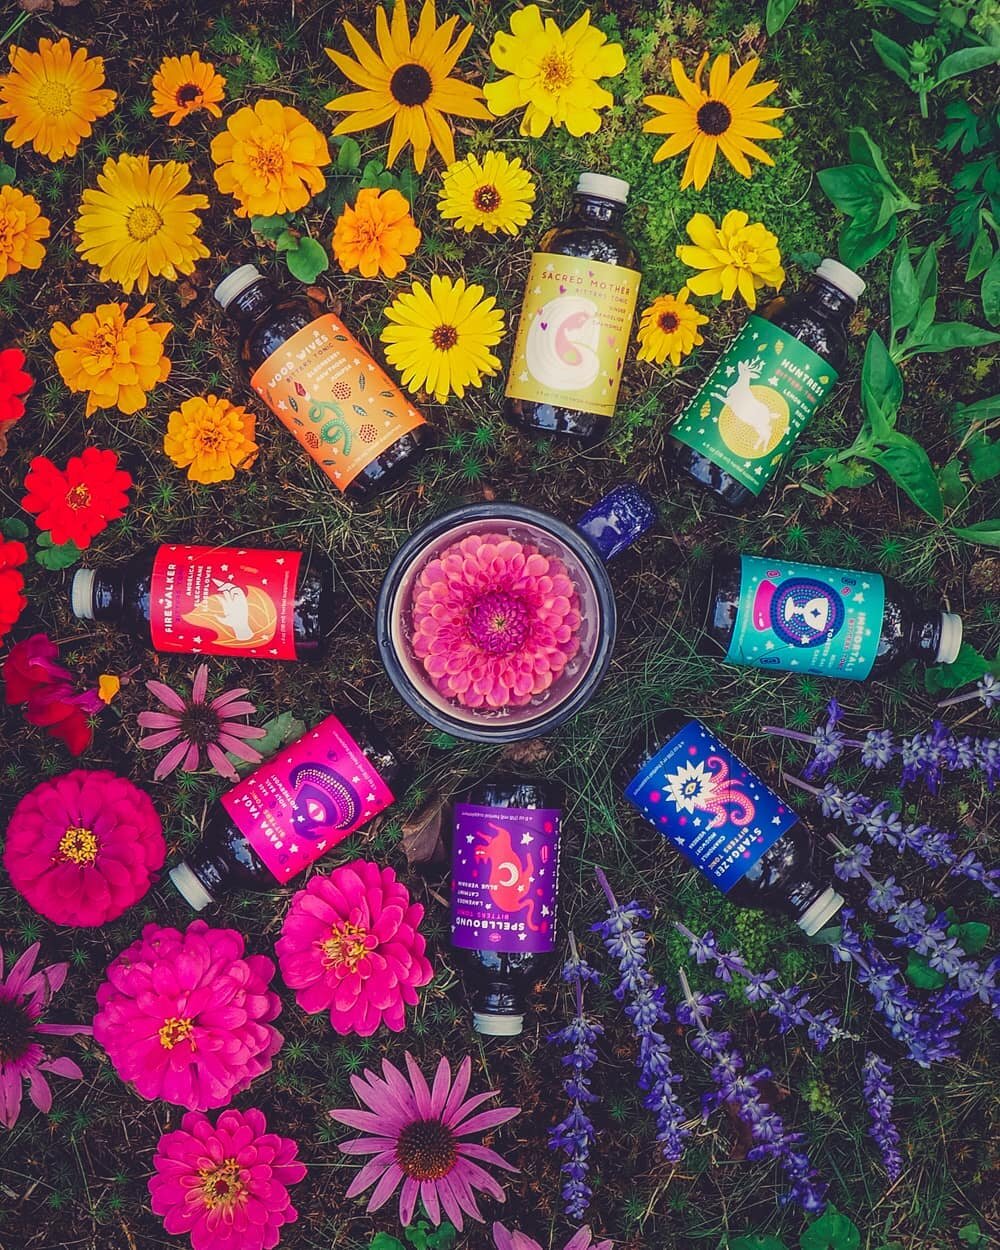 REWILD YOUR GUT :: SHOP IS OPEN :: Just as biodiversity is important in the environment, it is also essential in the body to ensure healthy function and digestion {as above, so below}.

Adding herbal bitters with diverse constituents, flavors and fun